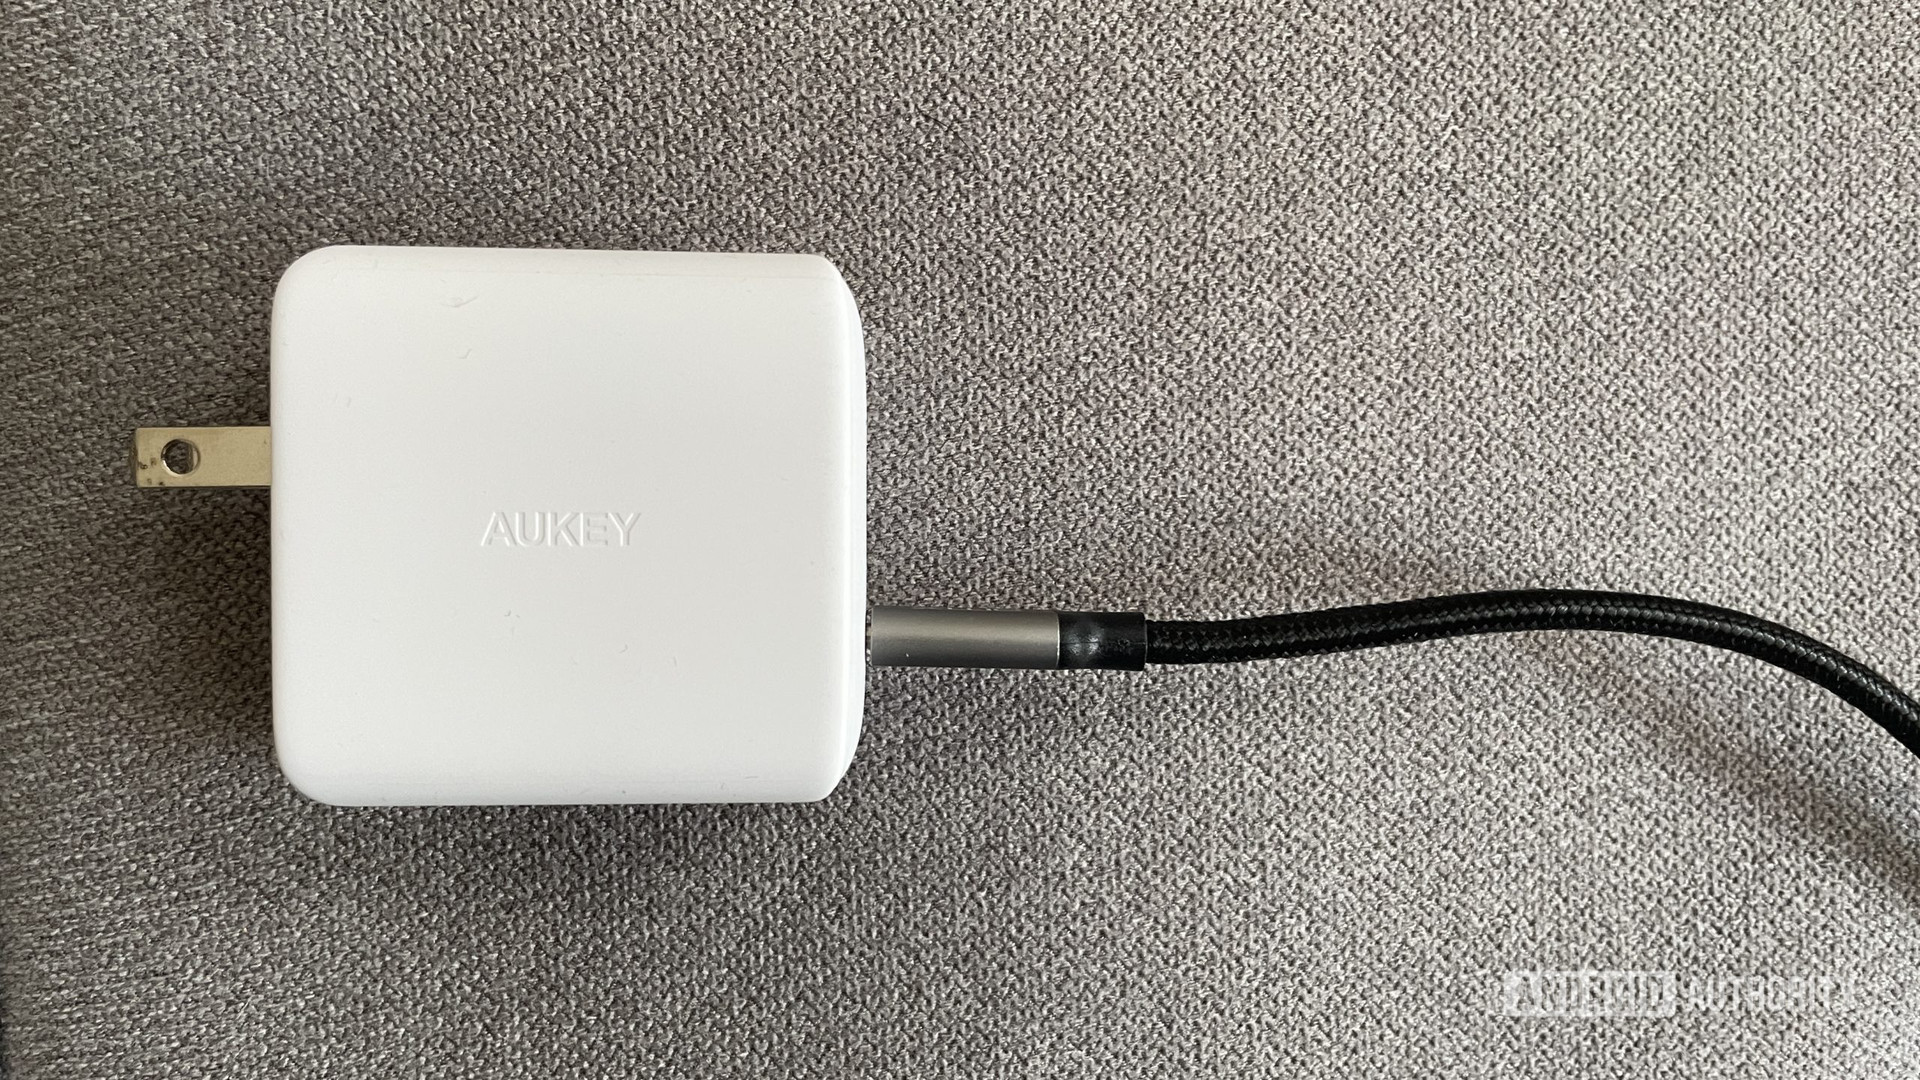 AUKEY Omnia 100W with USB C cable